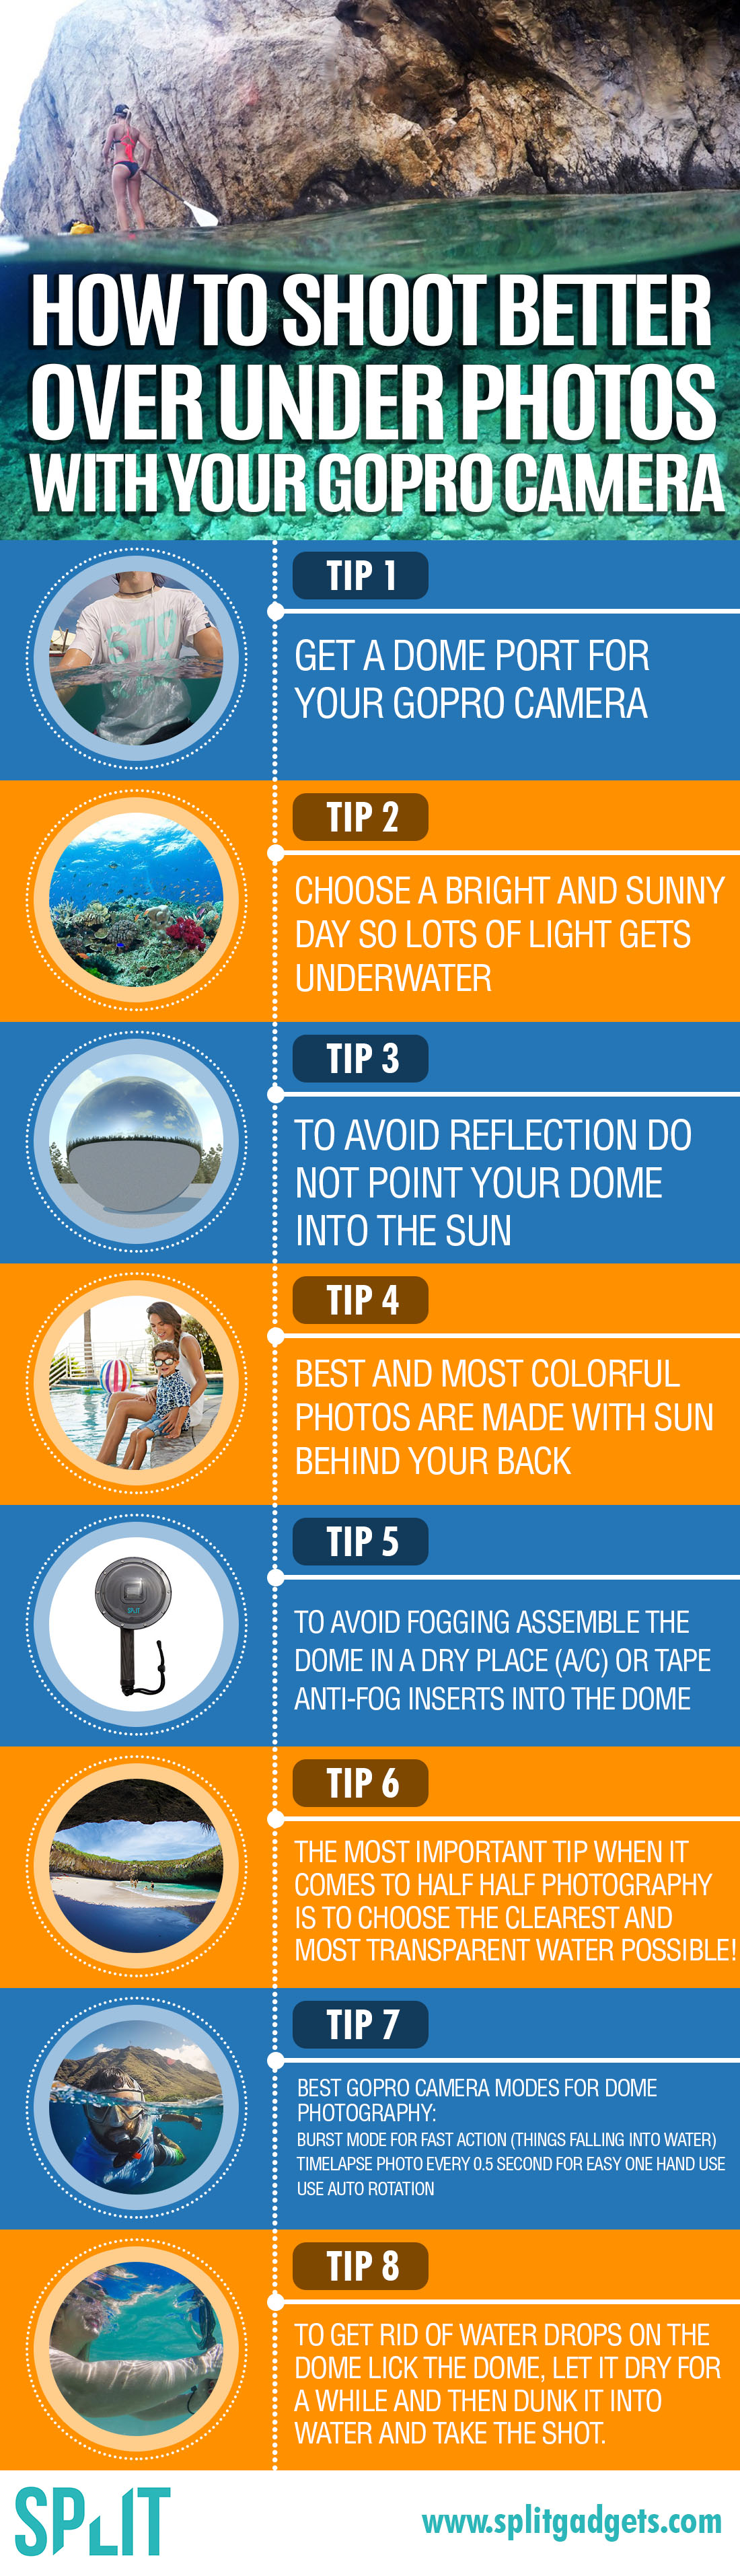 An infographic with tips on how to improve your half half GoPro camera photos